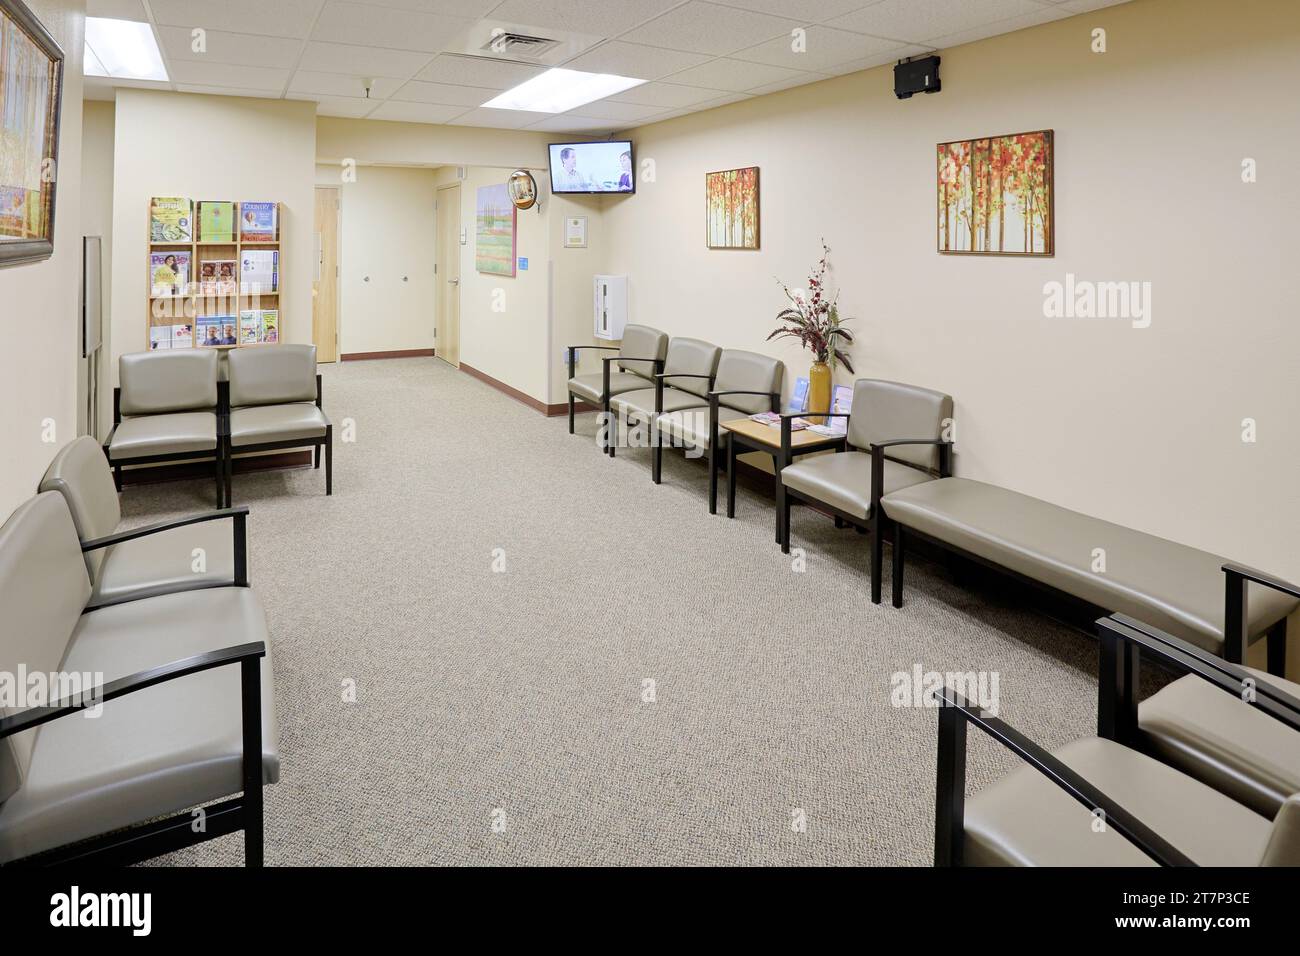 The waiting area of a modern doctors office, decorated in calm soothing earth tones. Stock Photo